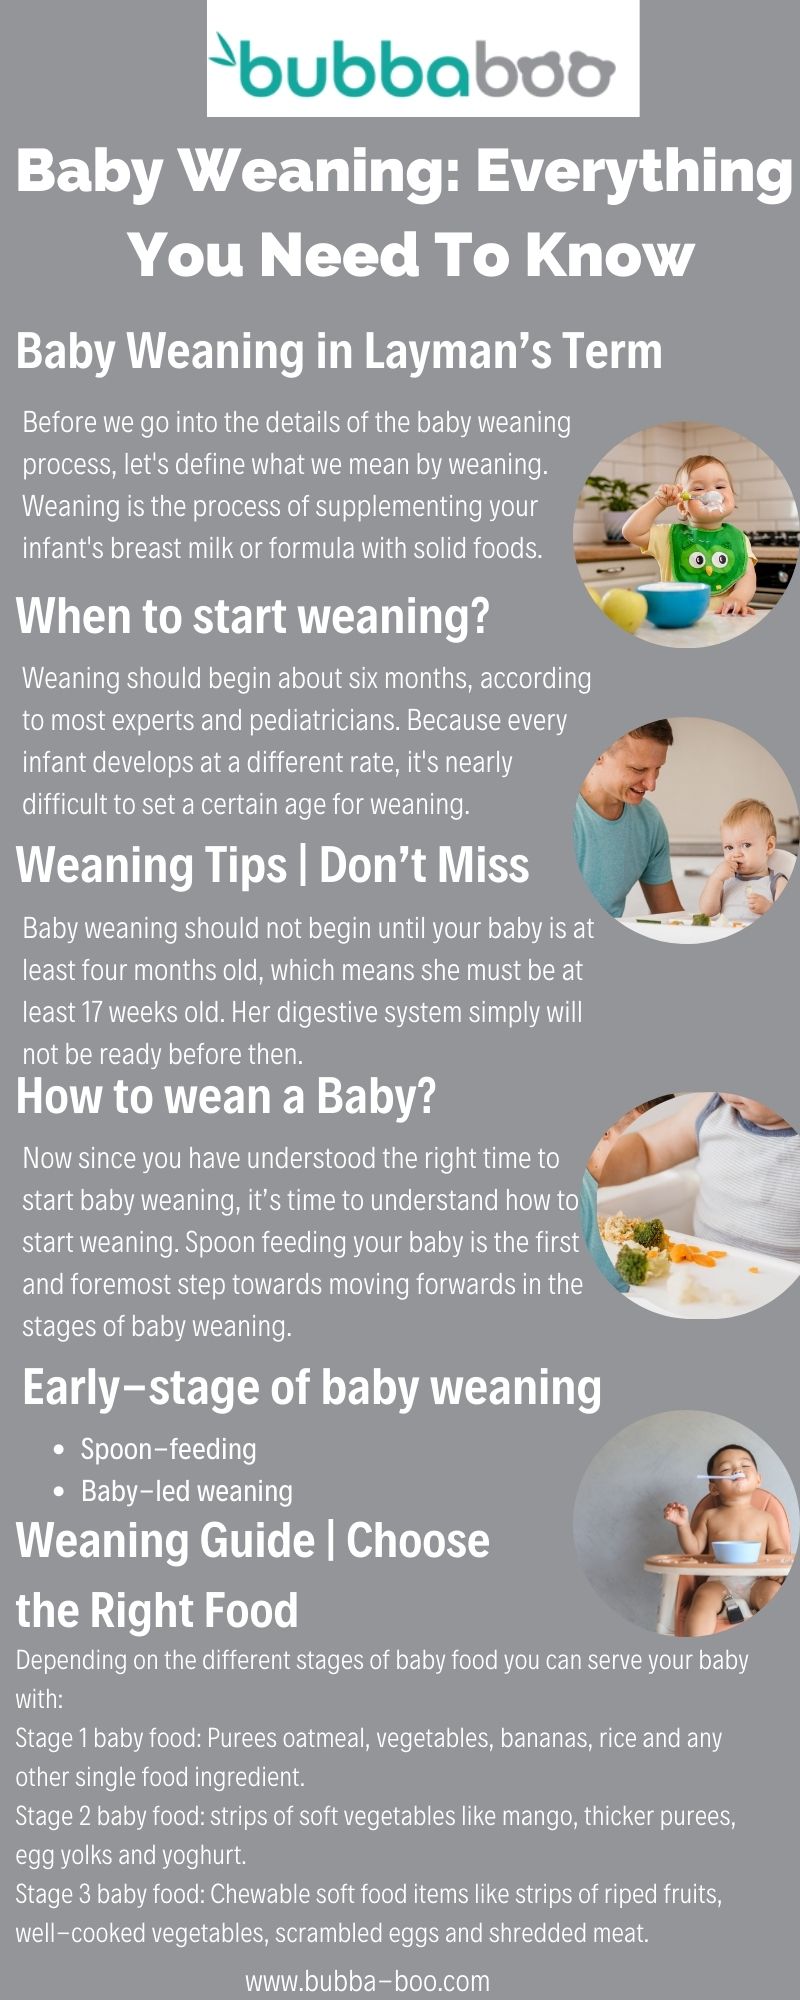 Baby Weaning: Everything You Need To Know